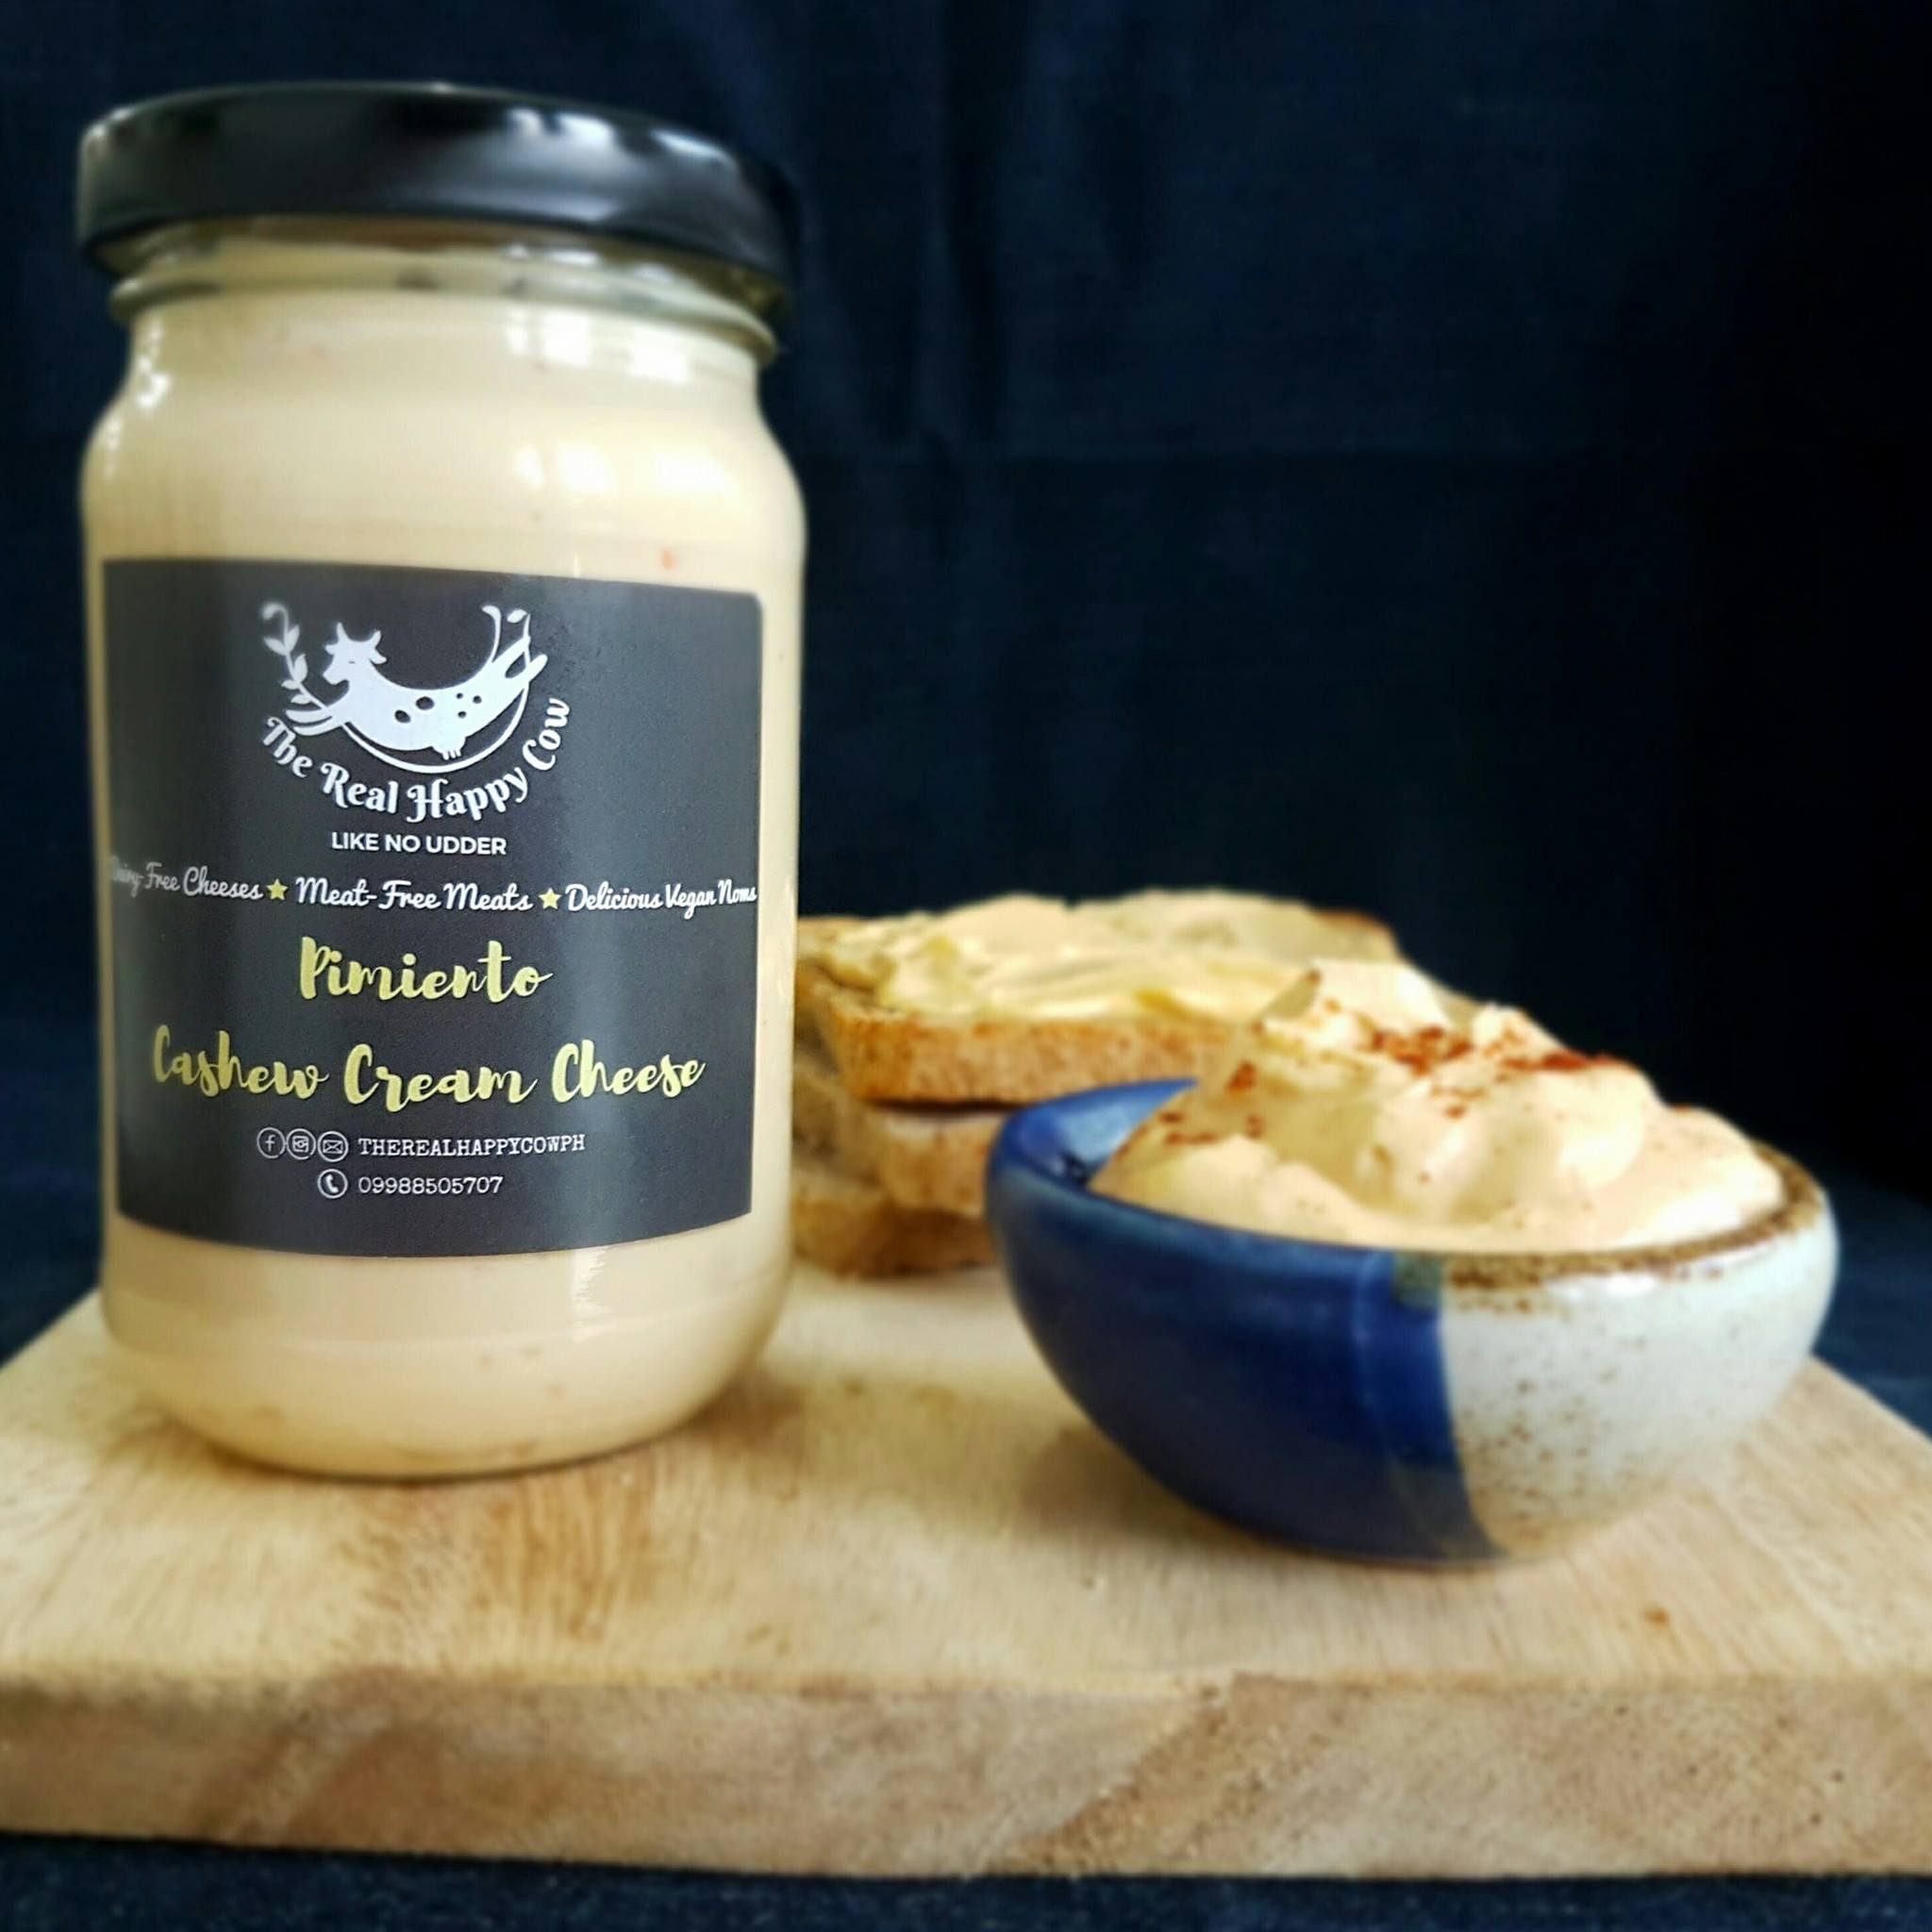 SPREADABLE! And vegan cheese can be conveniently spreadable, too! Photo courtesy of The Real Happy Cow 